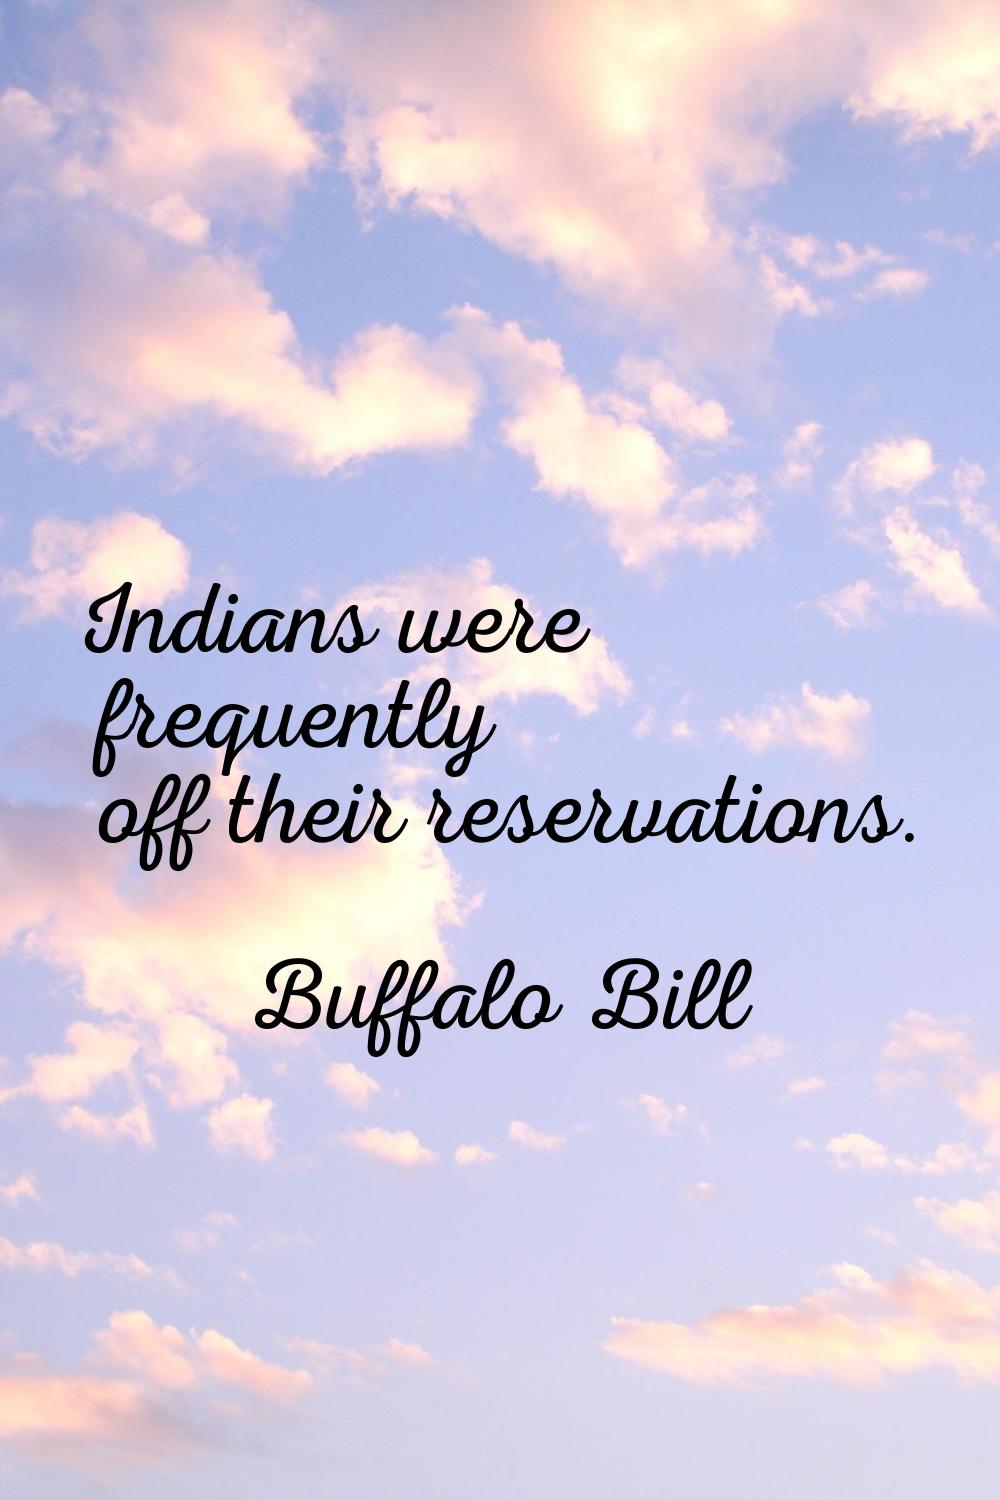 Indians were frequently off their reservations.